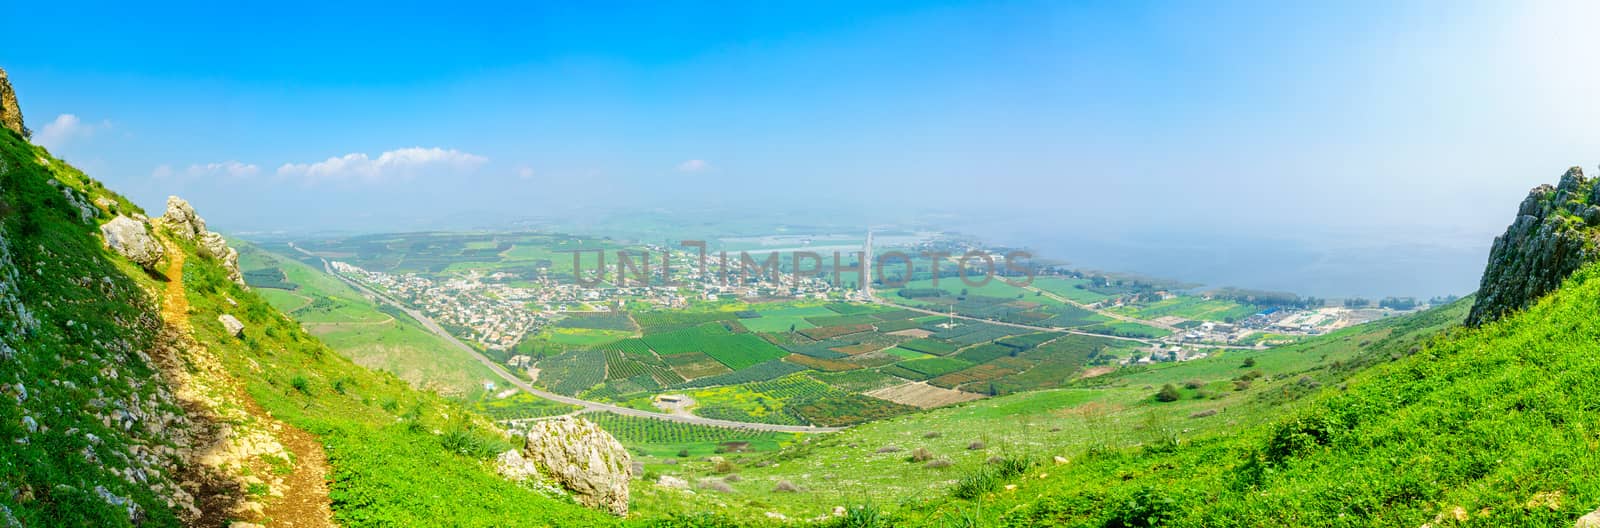 Panoramic landscape view from Mount Arbel, with Migdal and the Sea of Galilee. Northern Israel